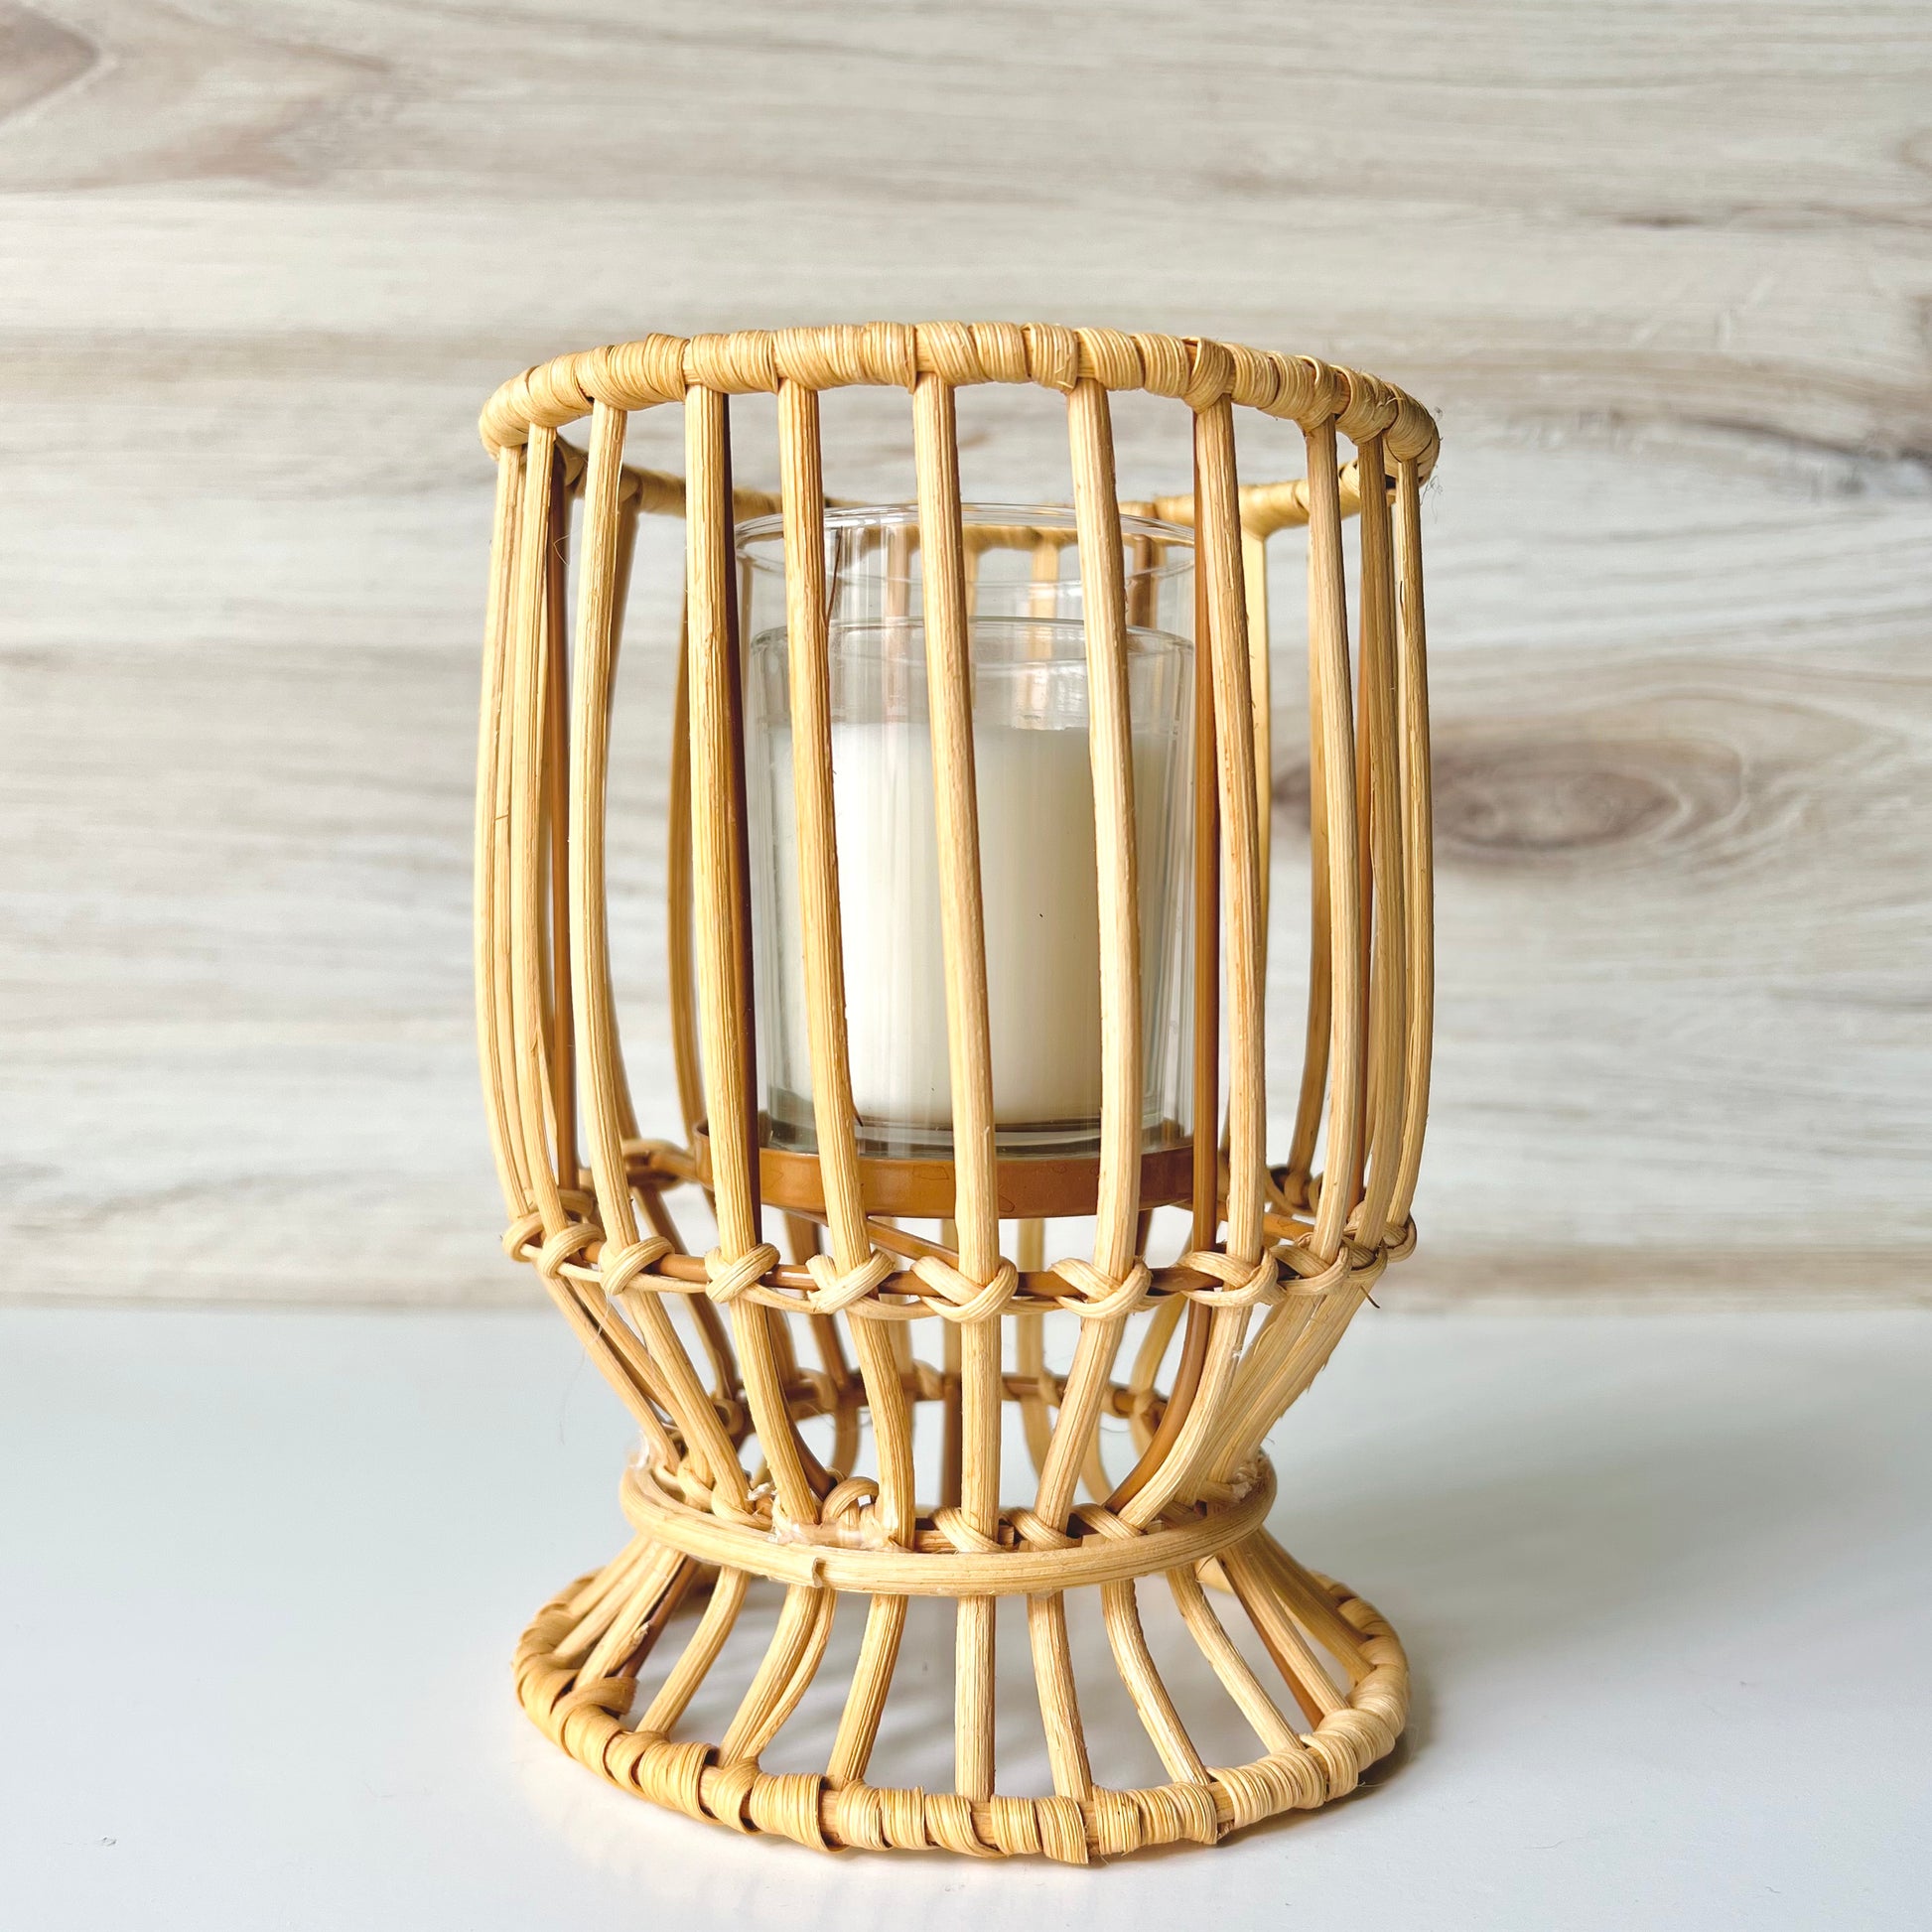 The Rattan Candle Holder on a white surface with a wooden wall behind - The Offbeat Co.